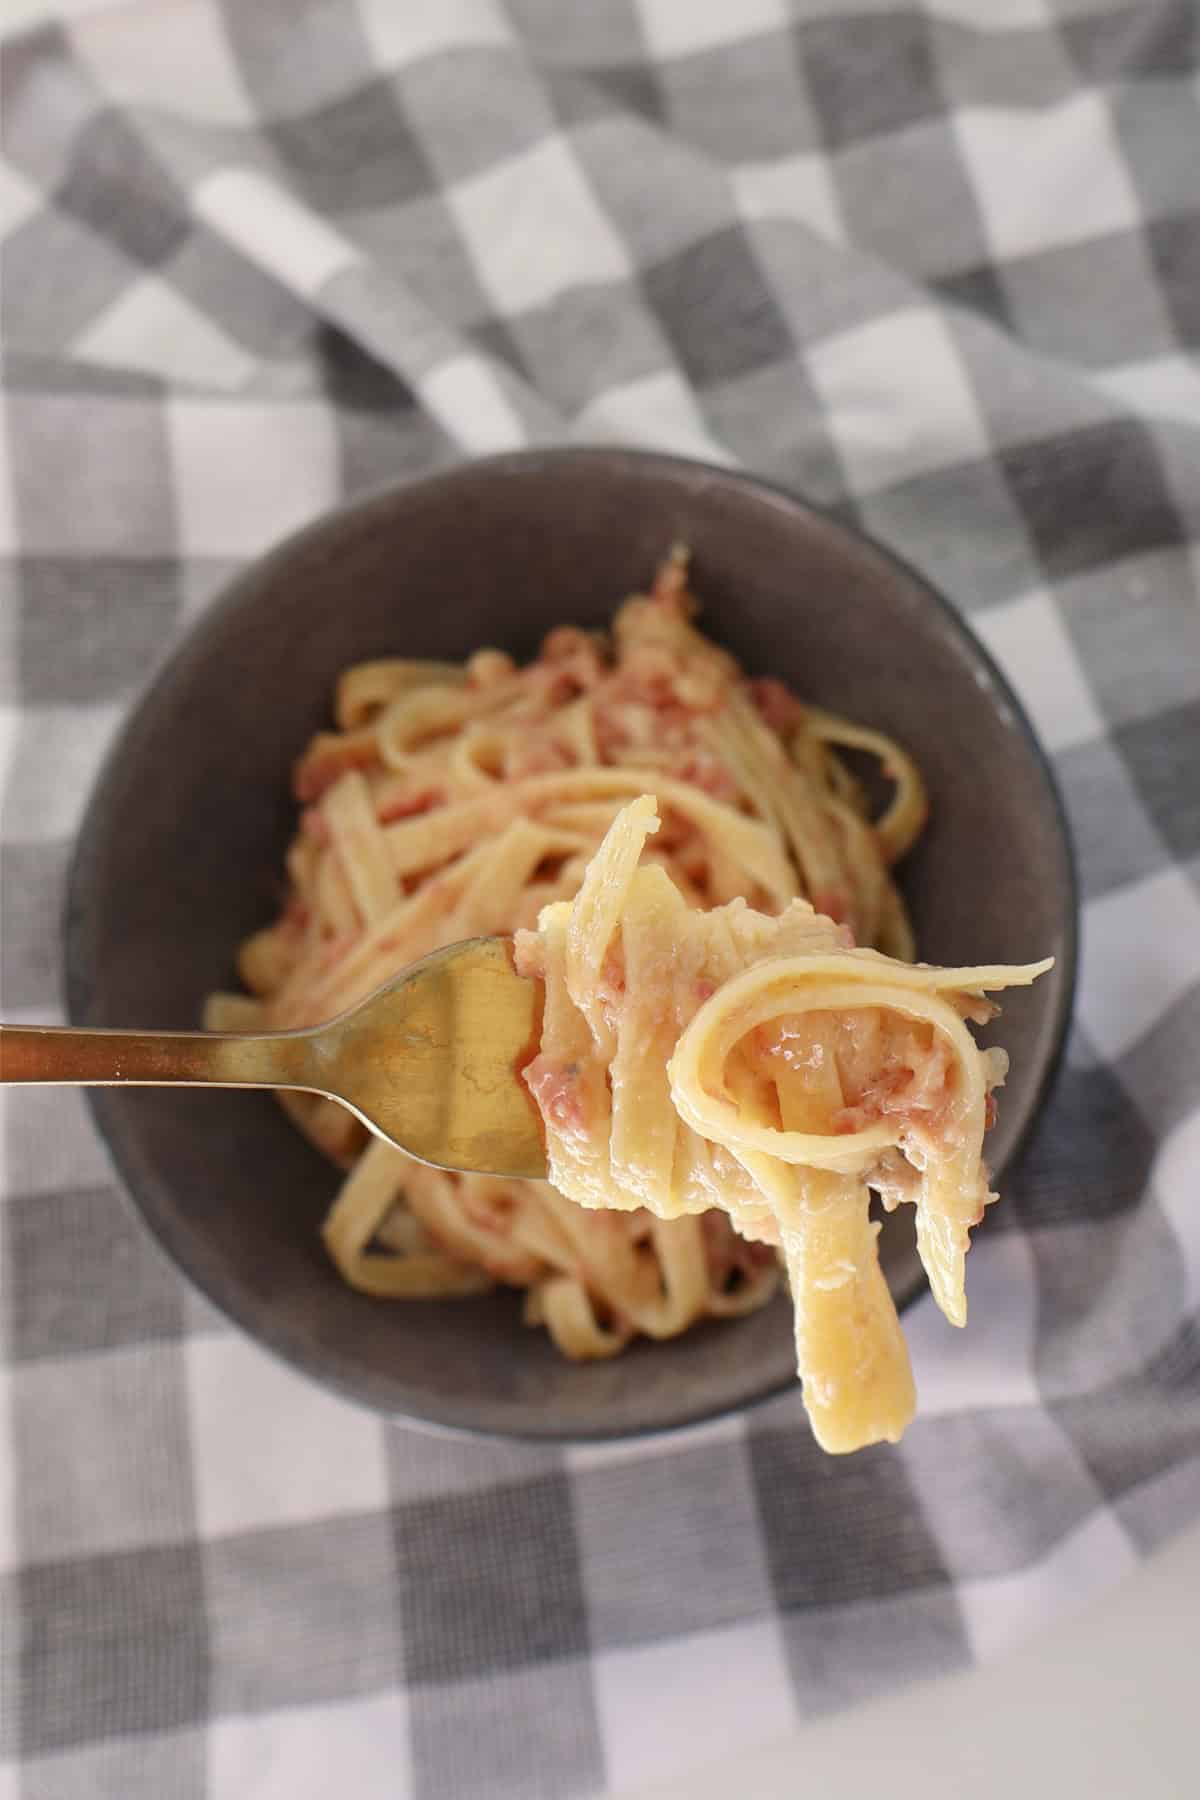 Overhead view of carbonara in a grey bowl. Over the top is a scoop of pasta being held up by a gold fork.